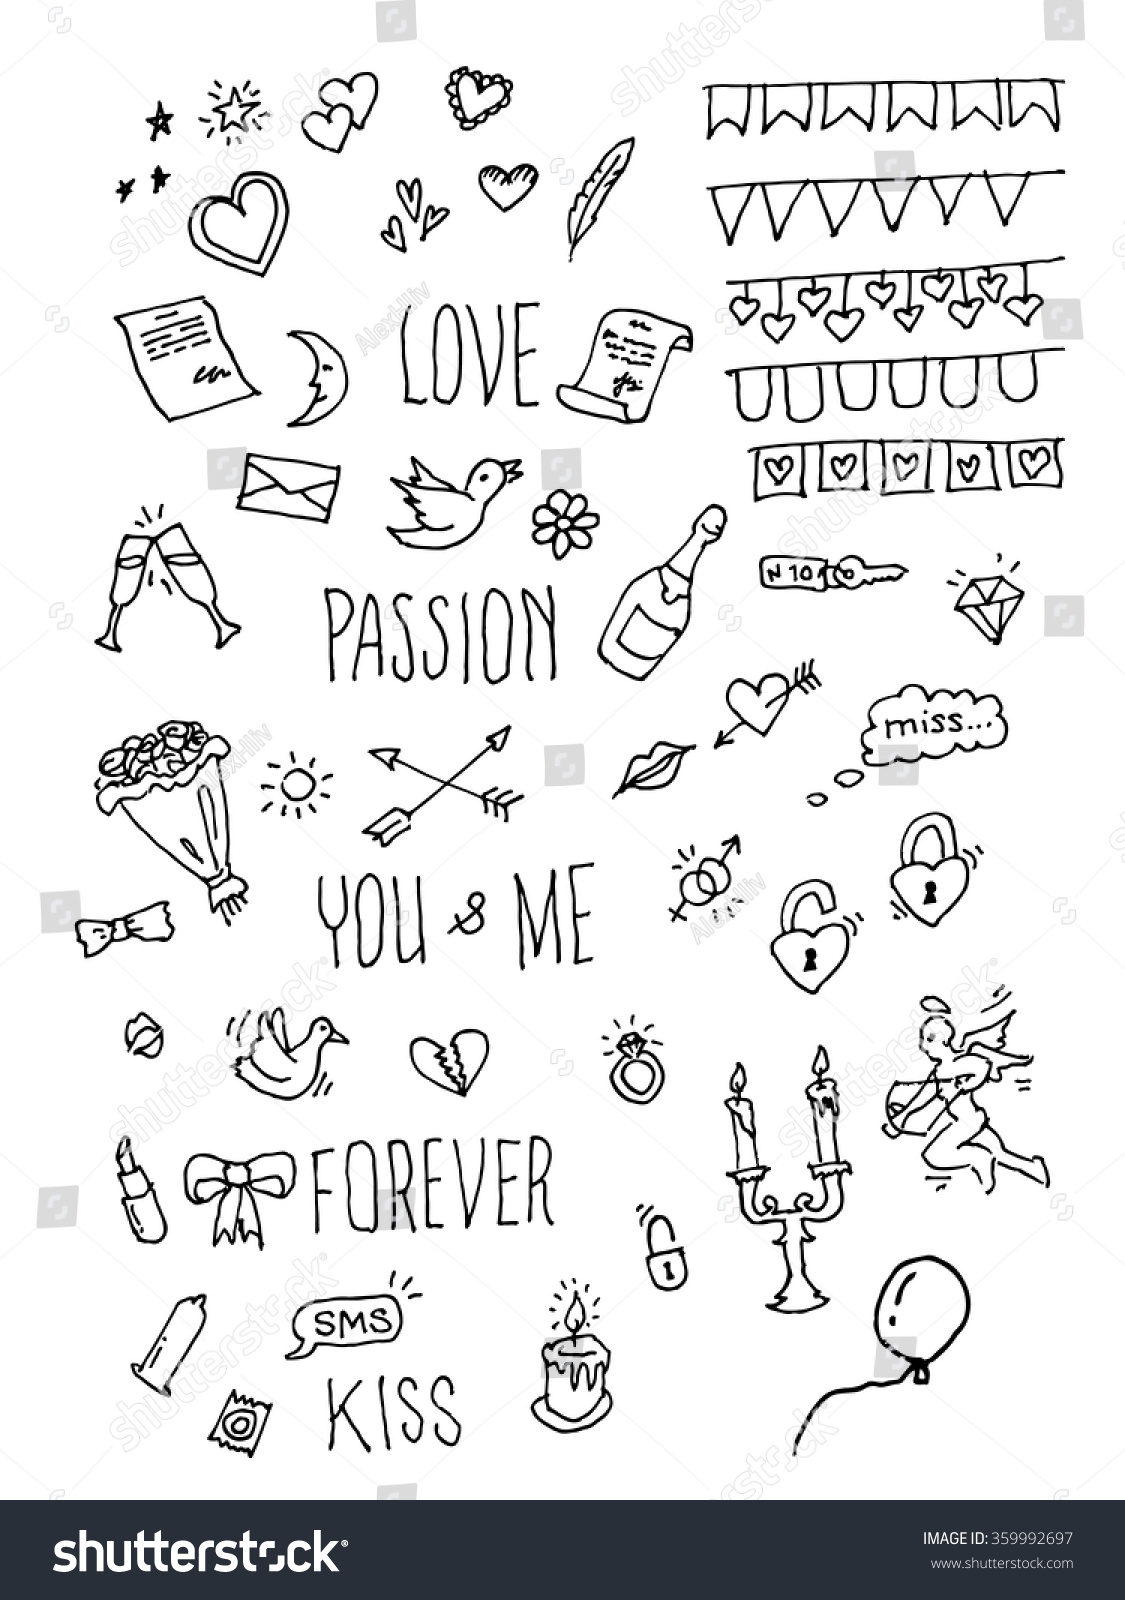 Download Valentine Day Doodle Pack Hand Drawn Stock Vector ...